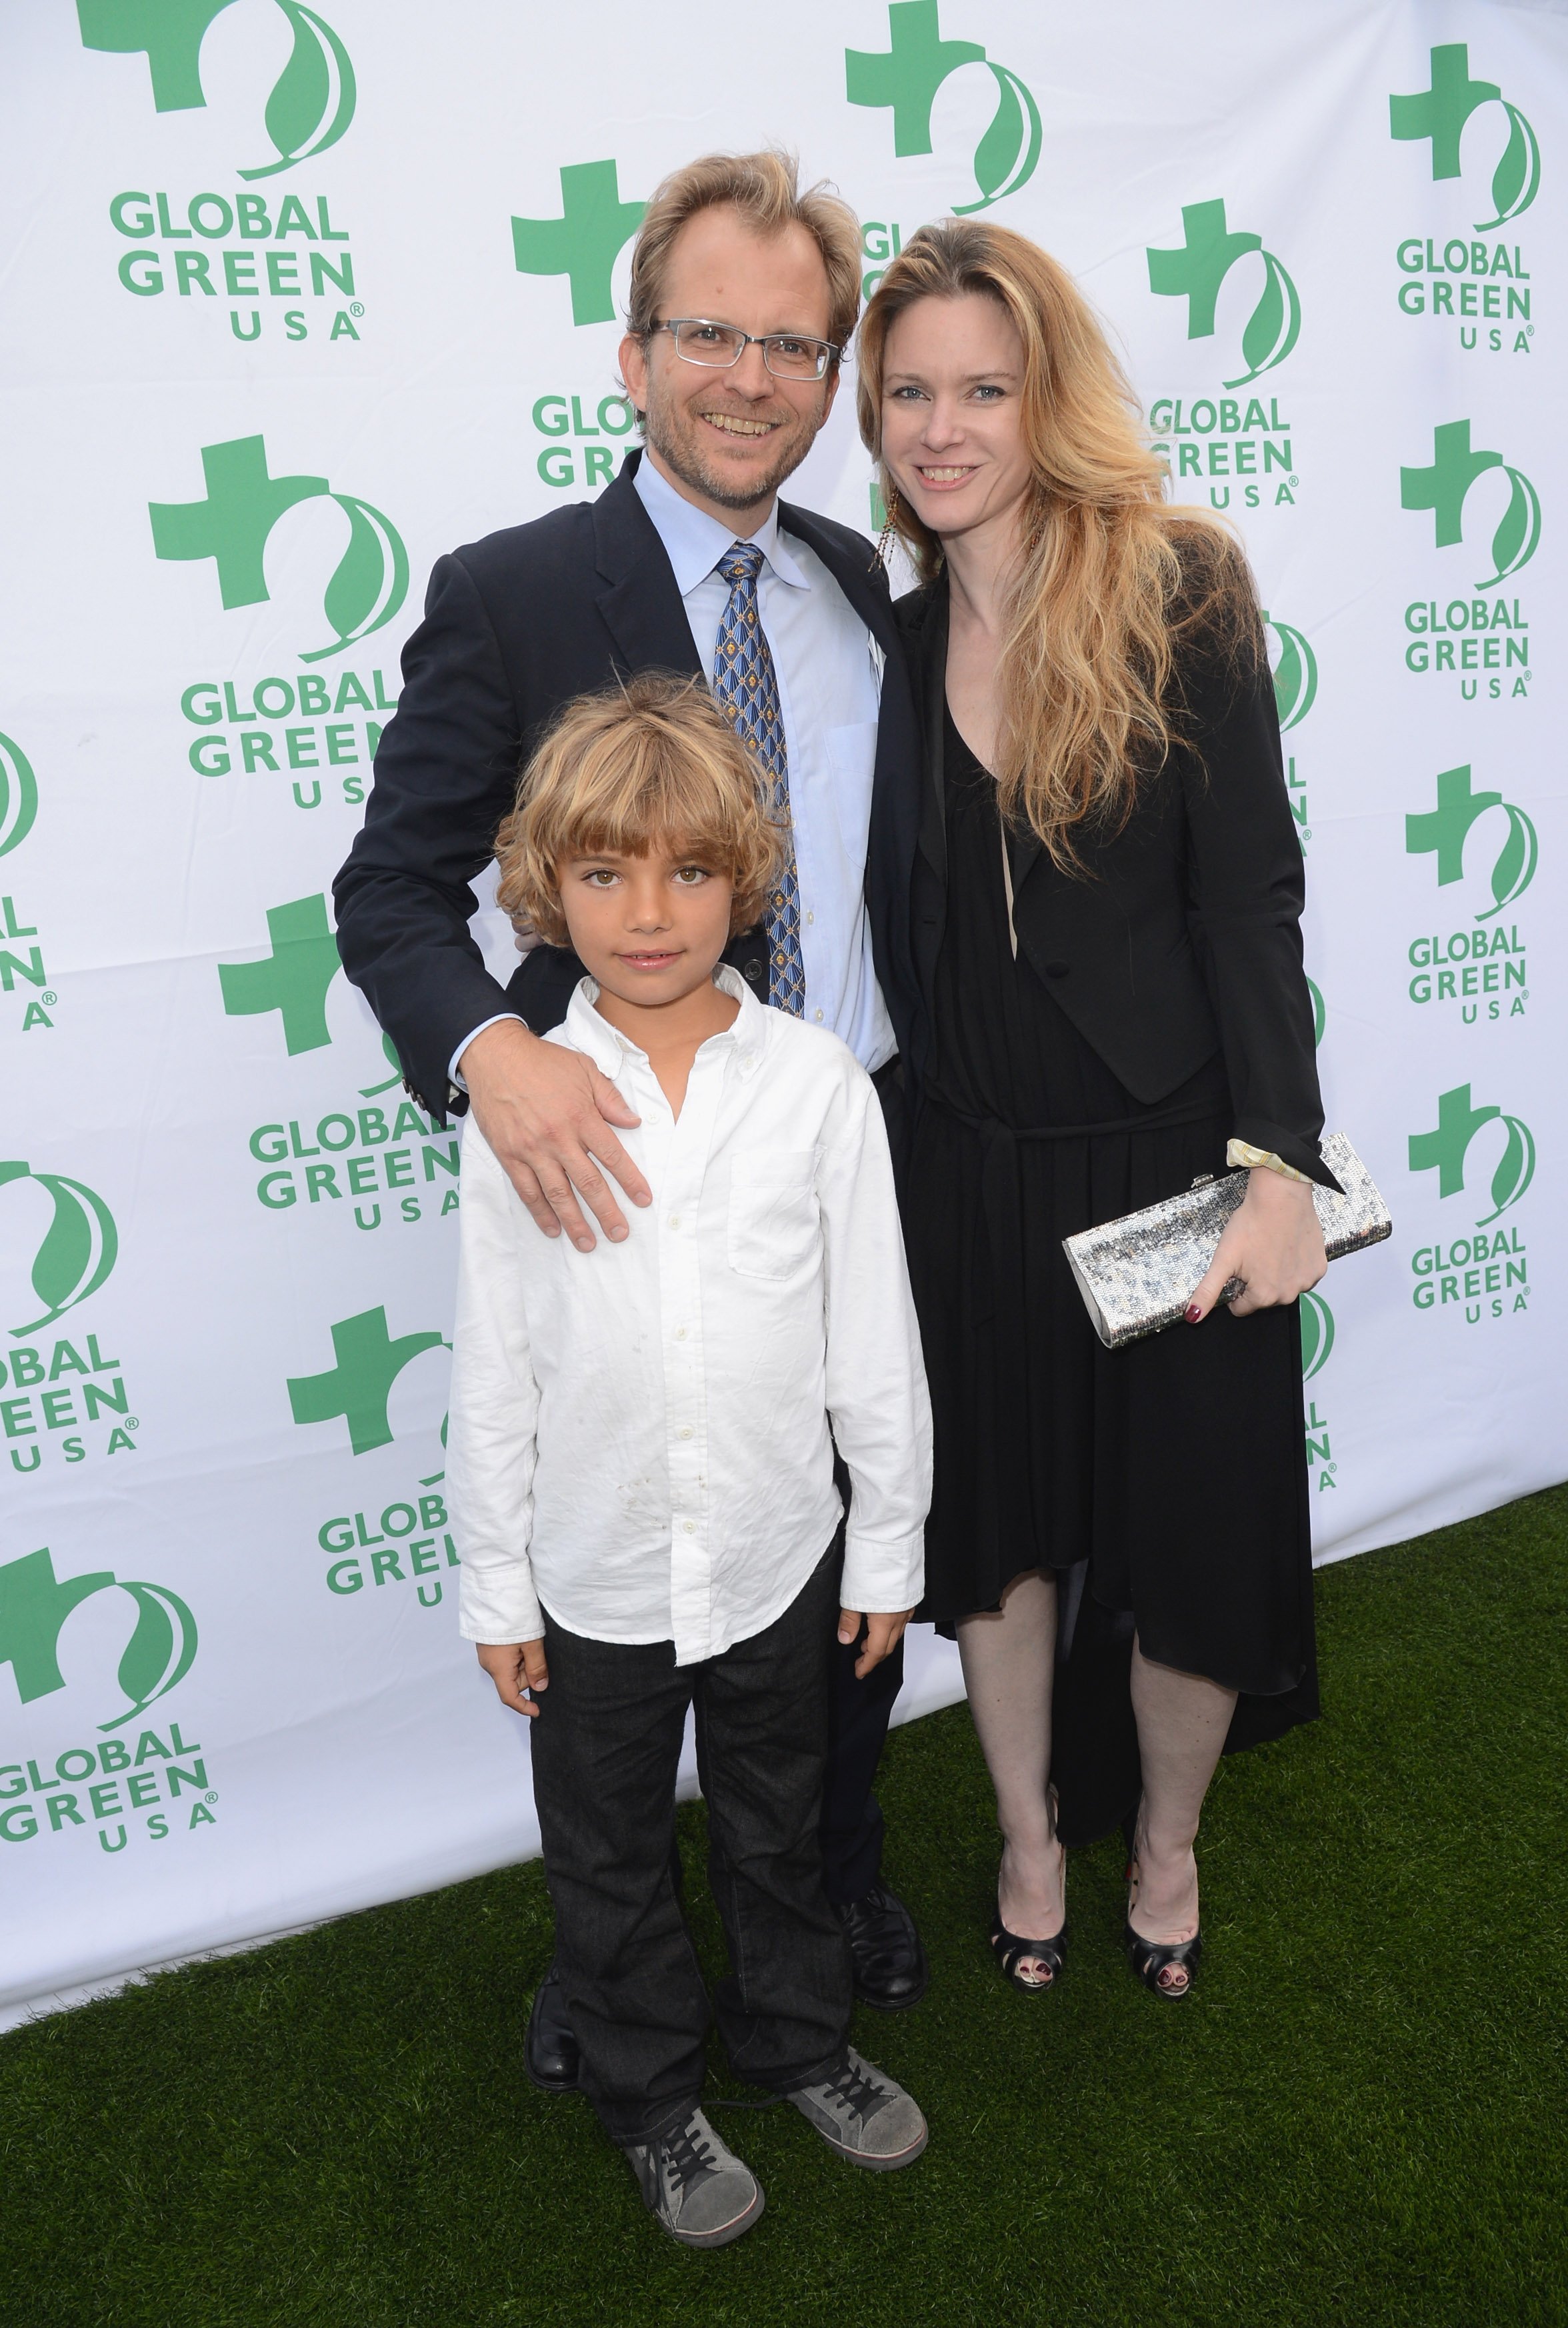 Matt Petersen and Justine Musk attend the 16th Annual Global Green USA Millennium Awards with a young boy, held at Fairmont Miramar Hotel on June 2, 2012, in Santa Monica, California | Source: Getty Images